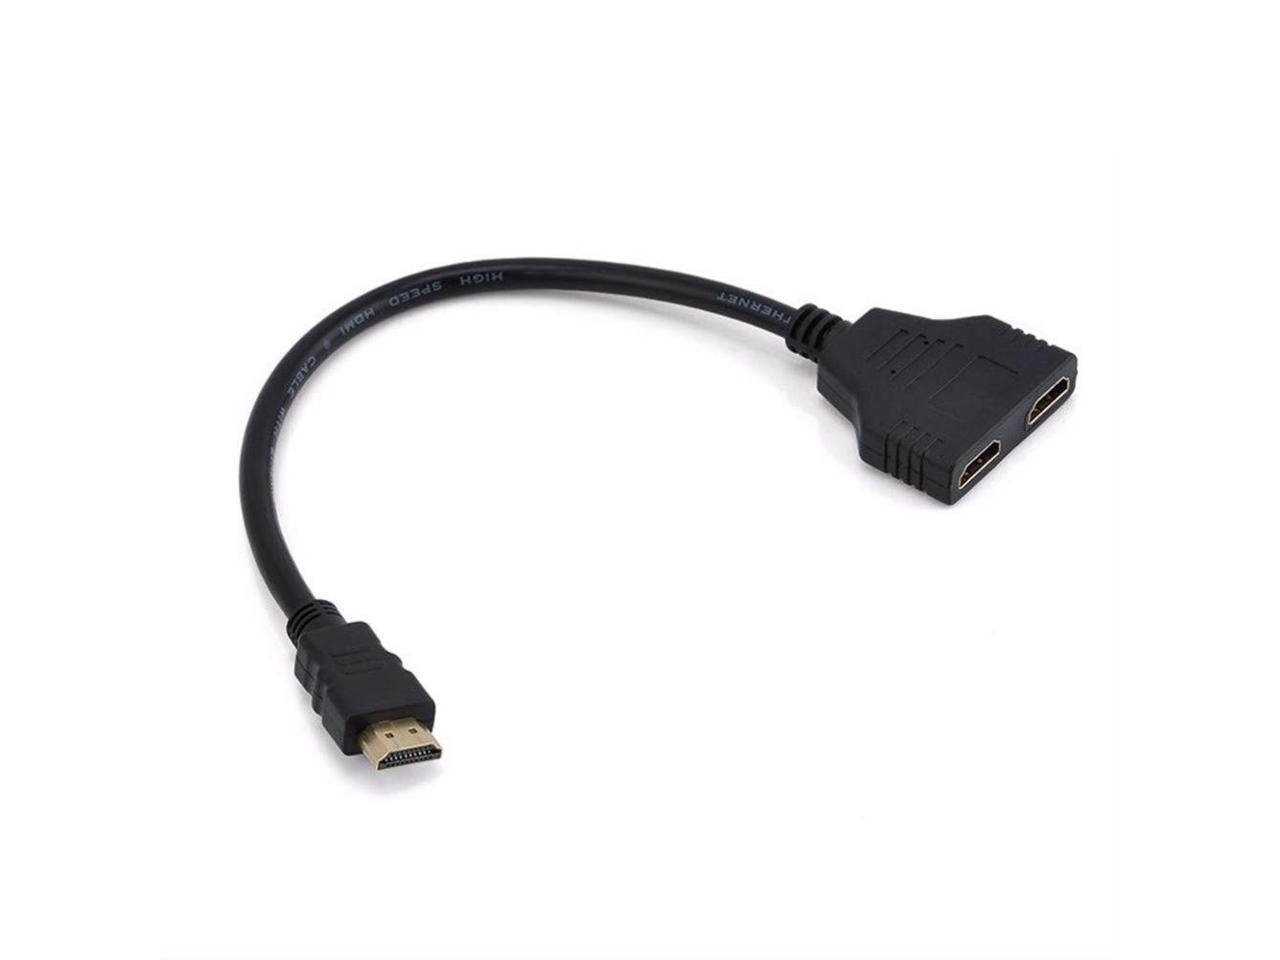 TV Signal One in,Two Out Black 12 Inch SYSAMA HDMI Cable 1080P HDMI Splitter Cable Port Male to 2 Female 1 in 2 Out Splitter Cable Adapter in HDMI HD LCD LED 